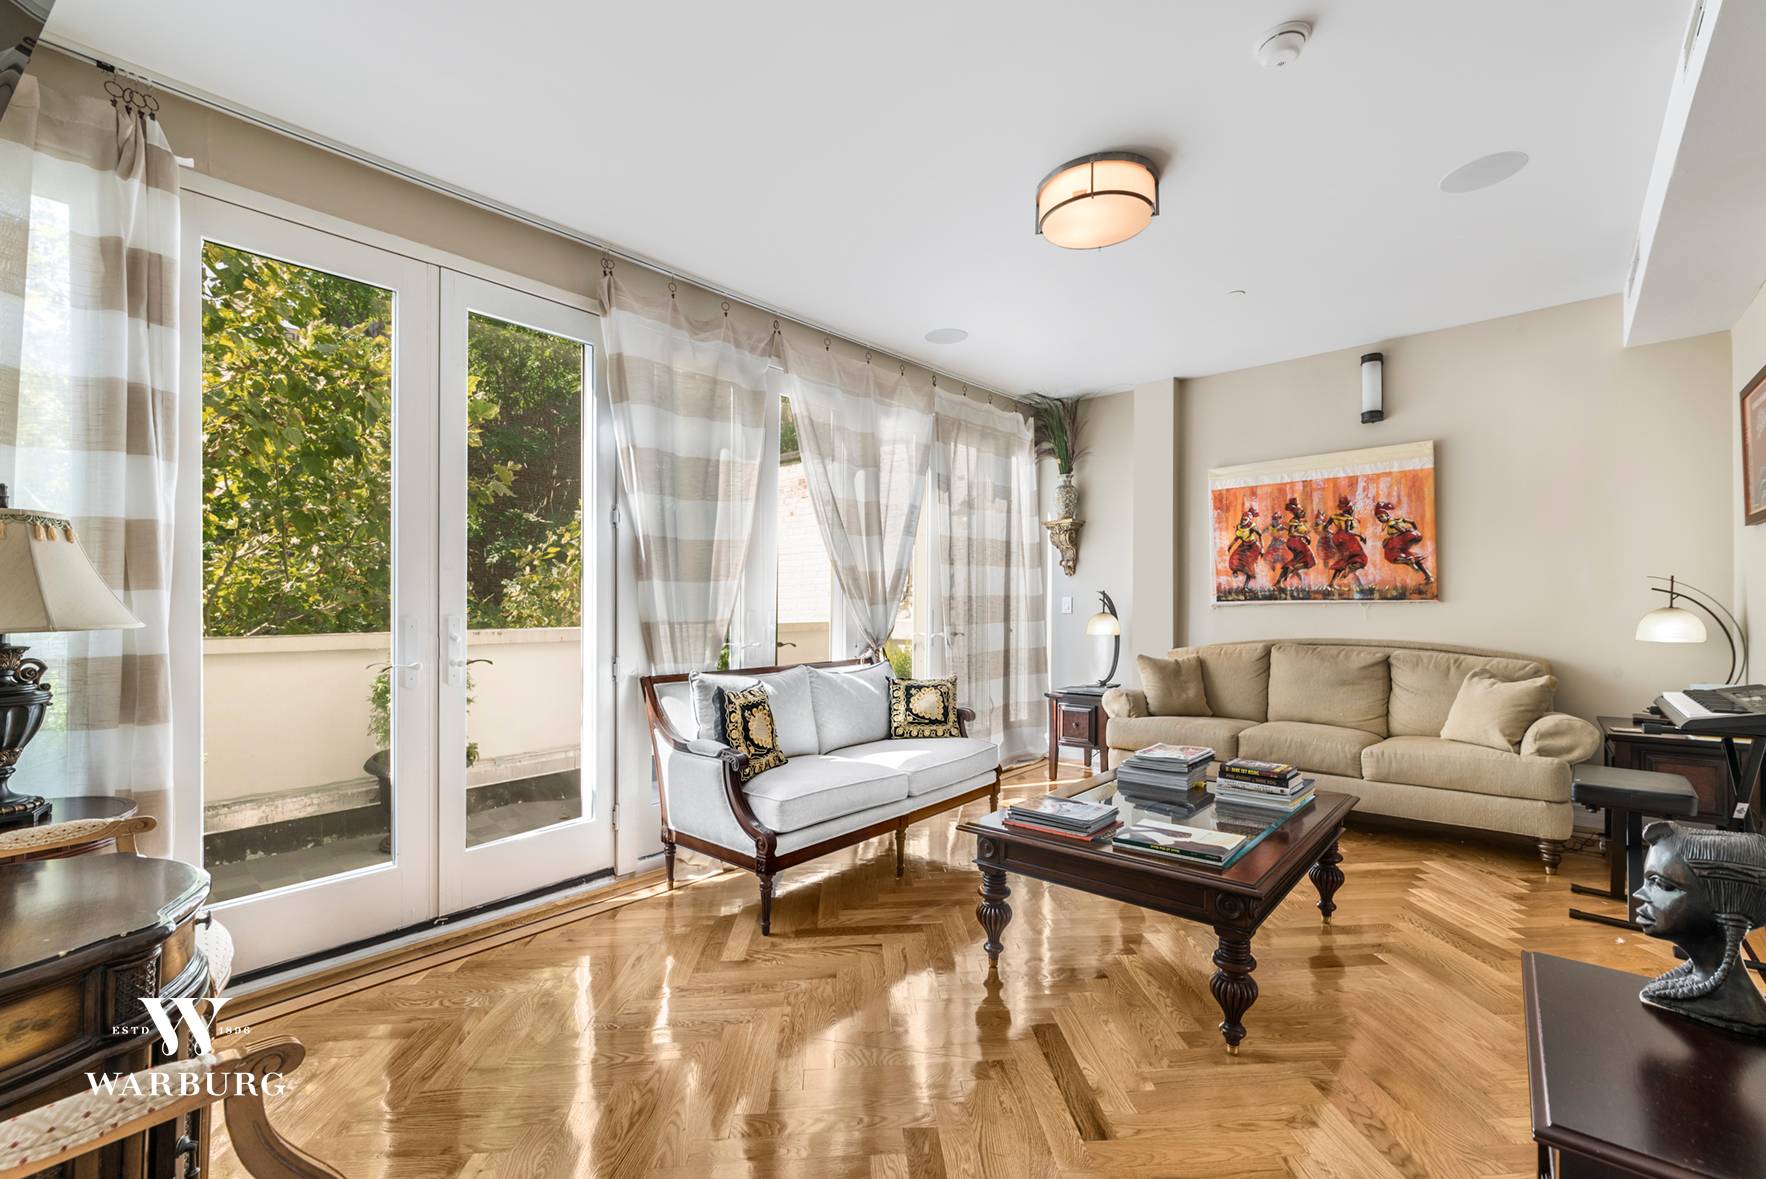 PRICE REDUCTION ! Distinctive and with numerous options for conversion investment, 32 East 74th Street is situated on the most coveted and charming city blocks on the Upper East Side, ...